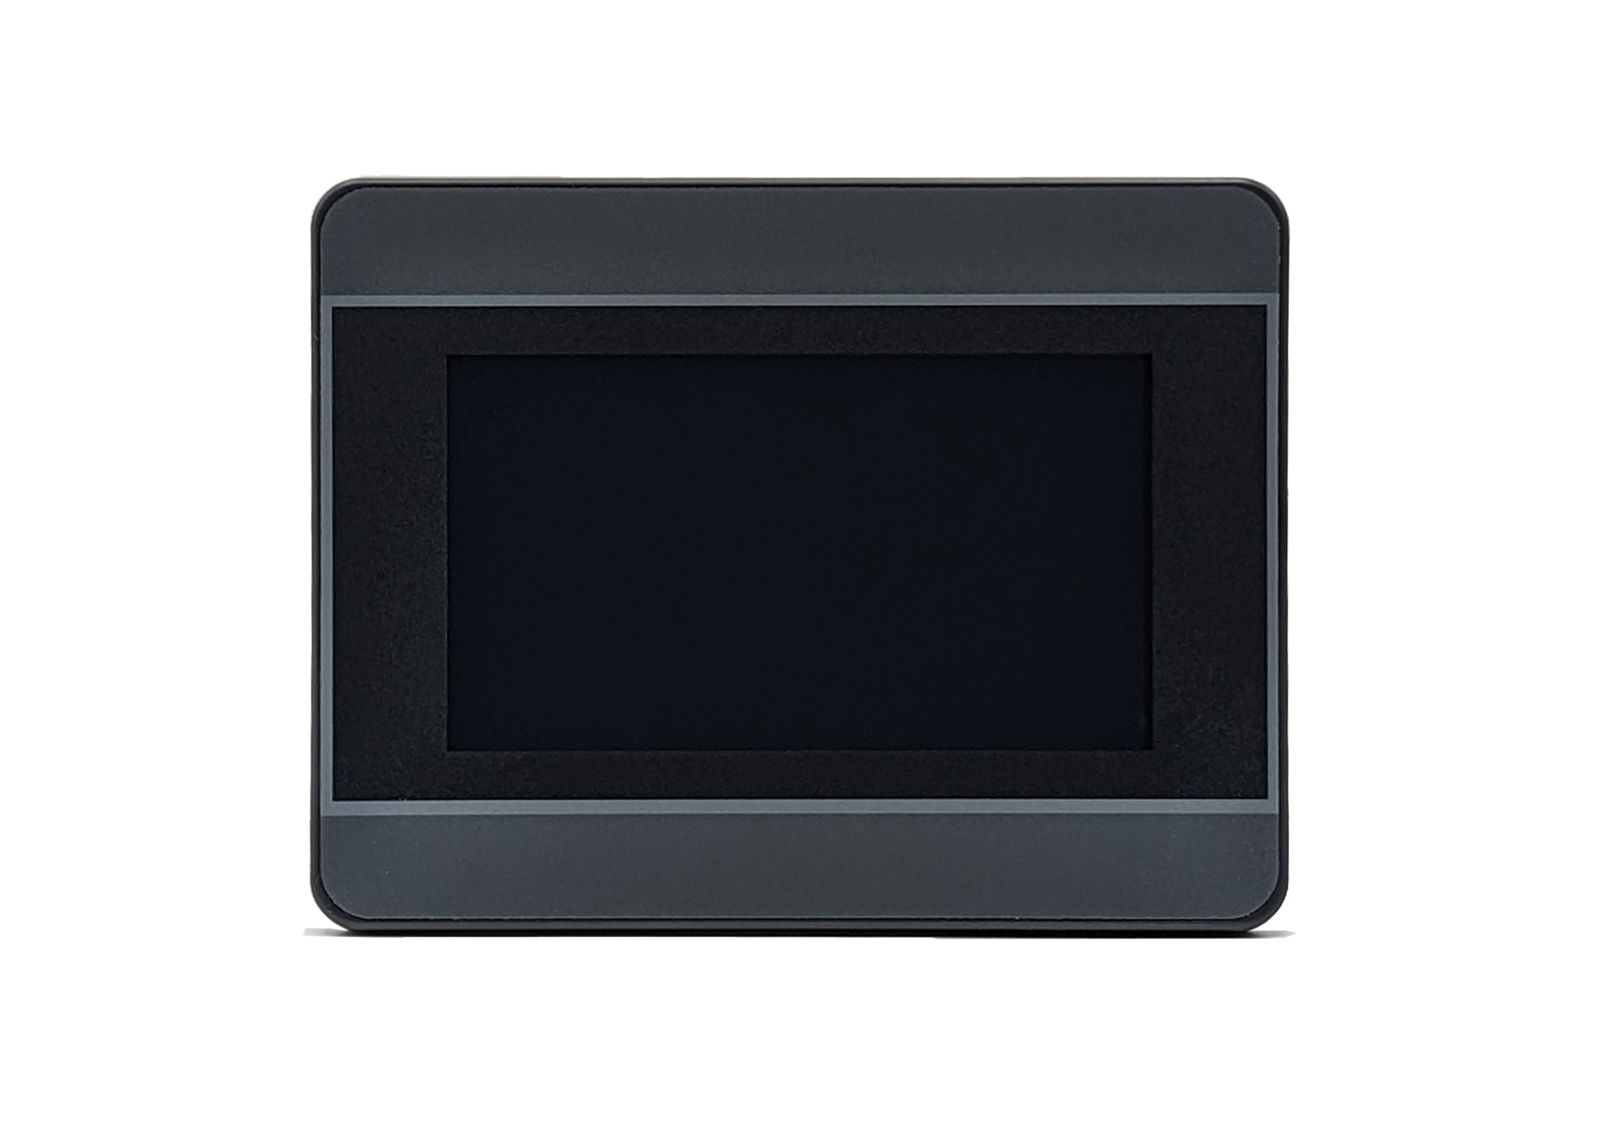 Kinco M2043HE-Blank 4" M2 Series Widescreen HMI touch panel with neutral front foil